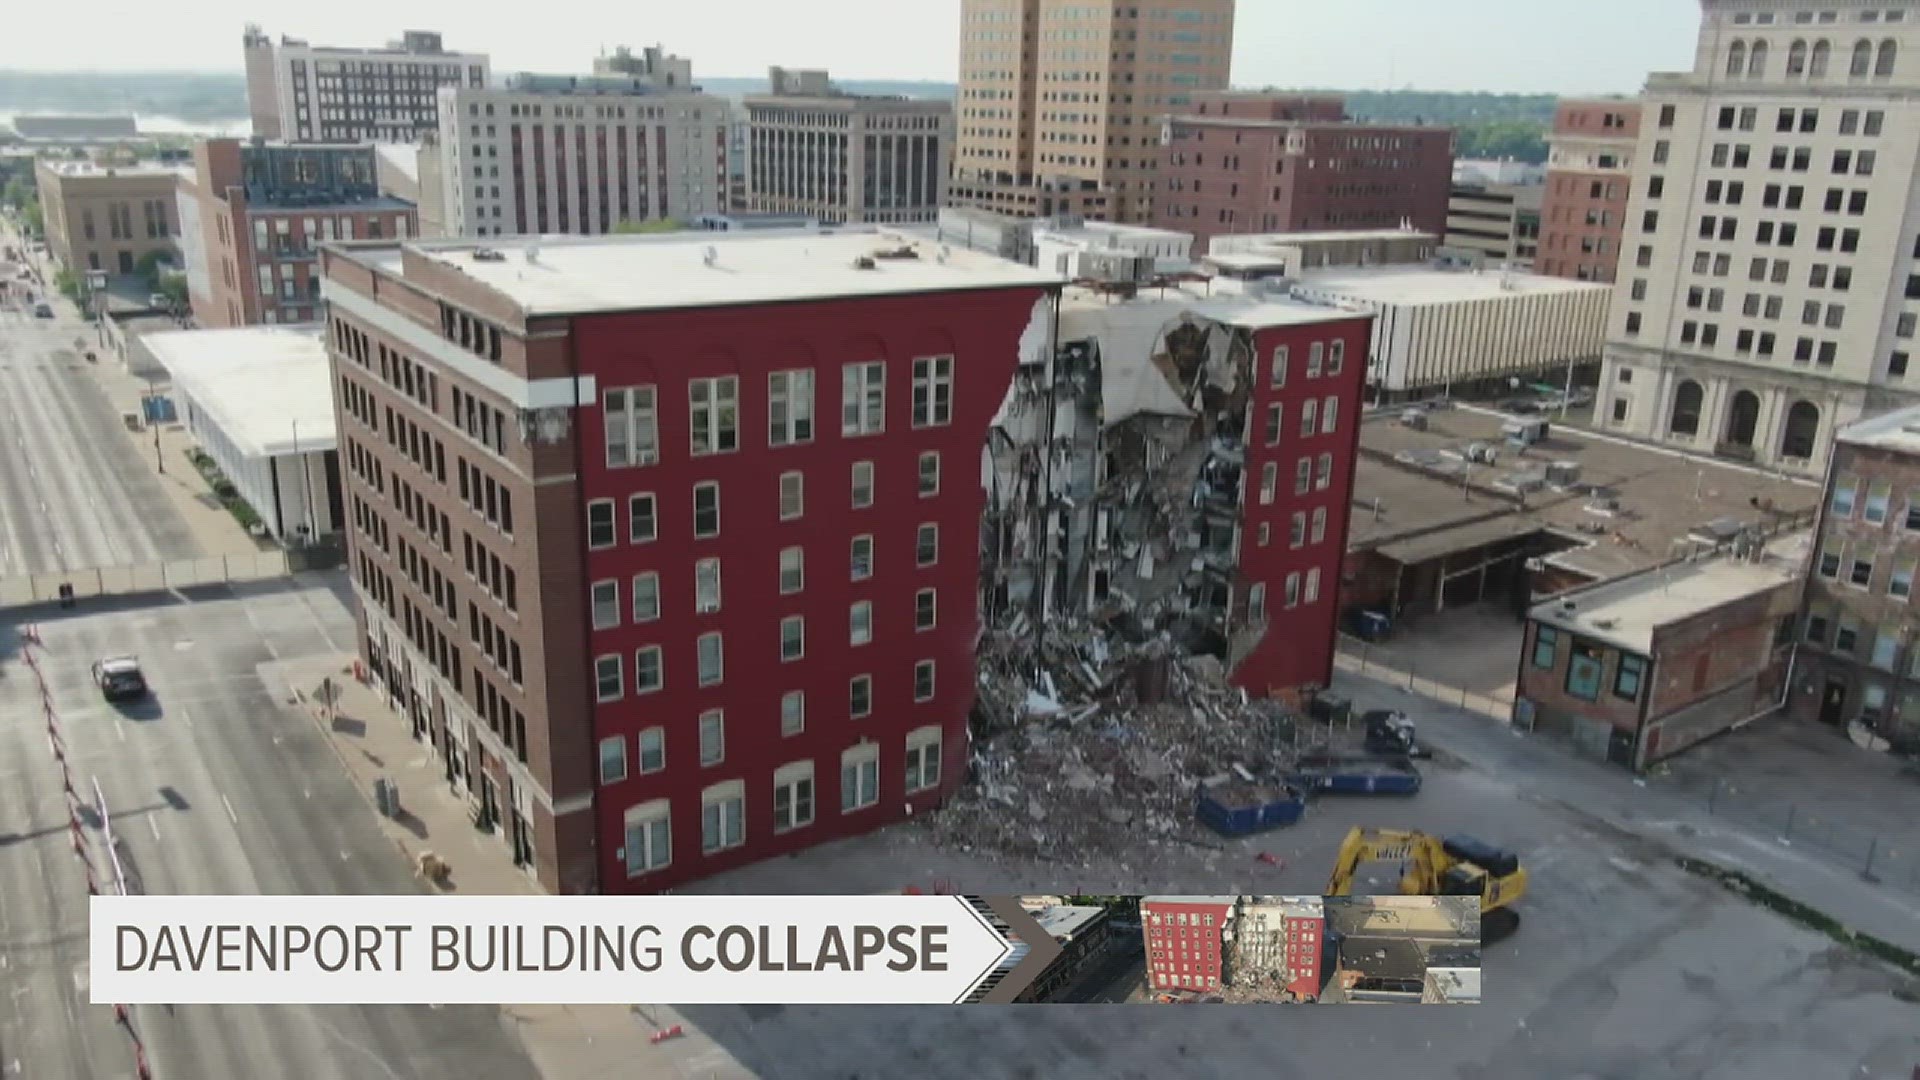 Davenport building owner Andrew Wold is filing a lawsuit against Select Structural Engineering for their alleged negligence in the Davenport collapse.